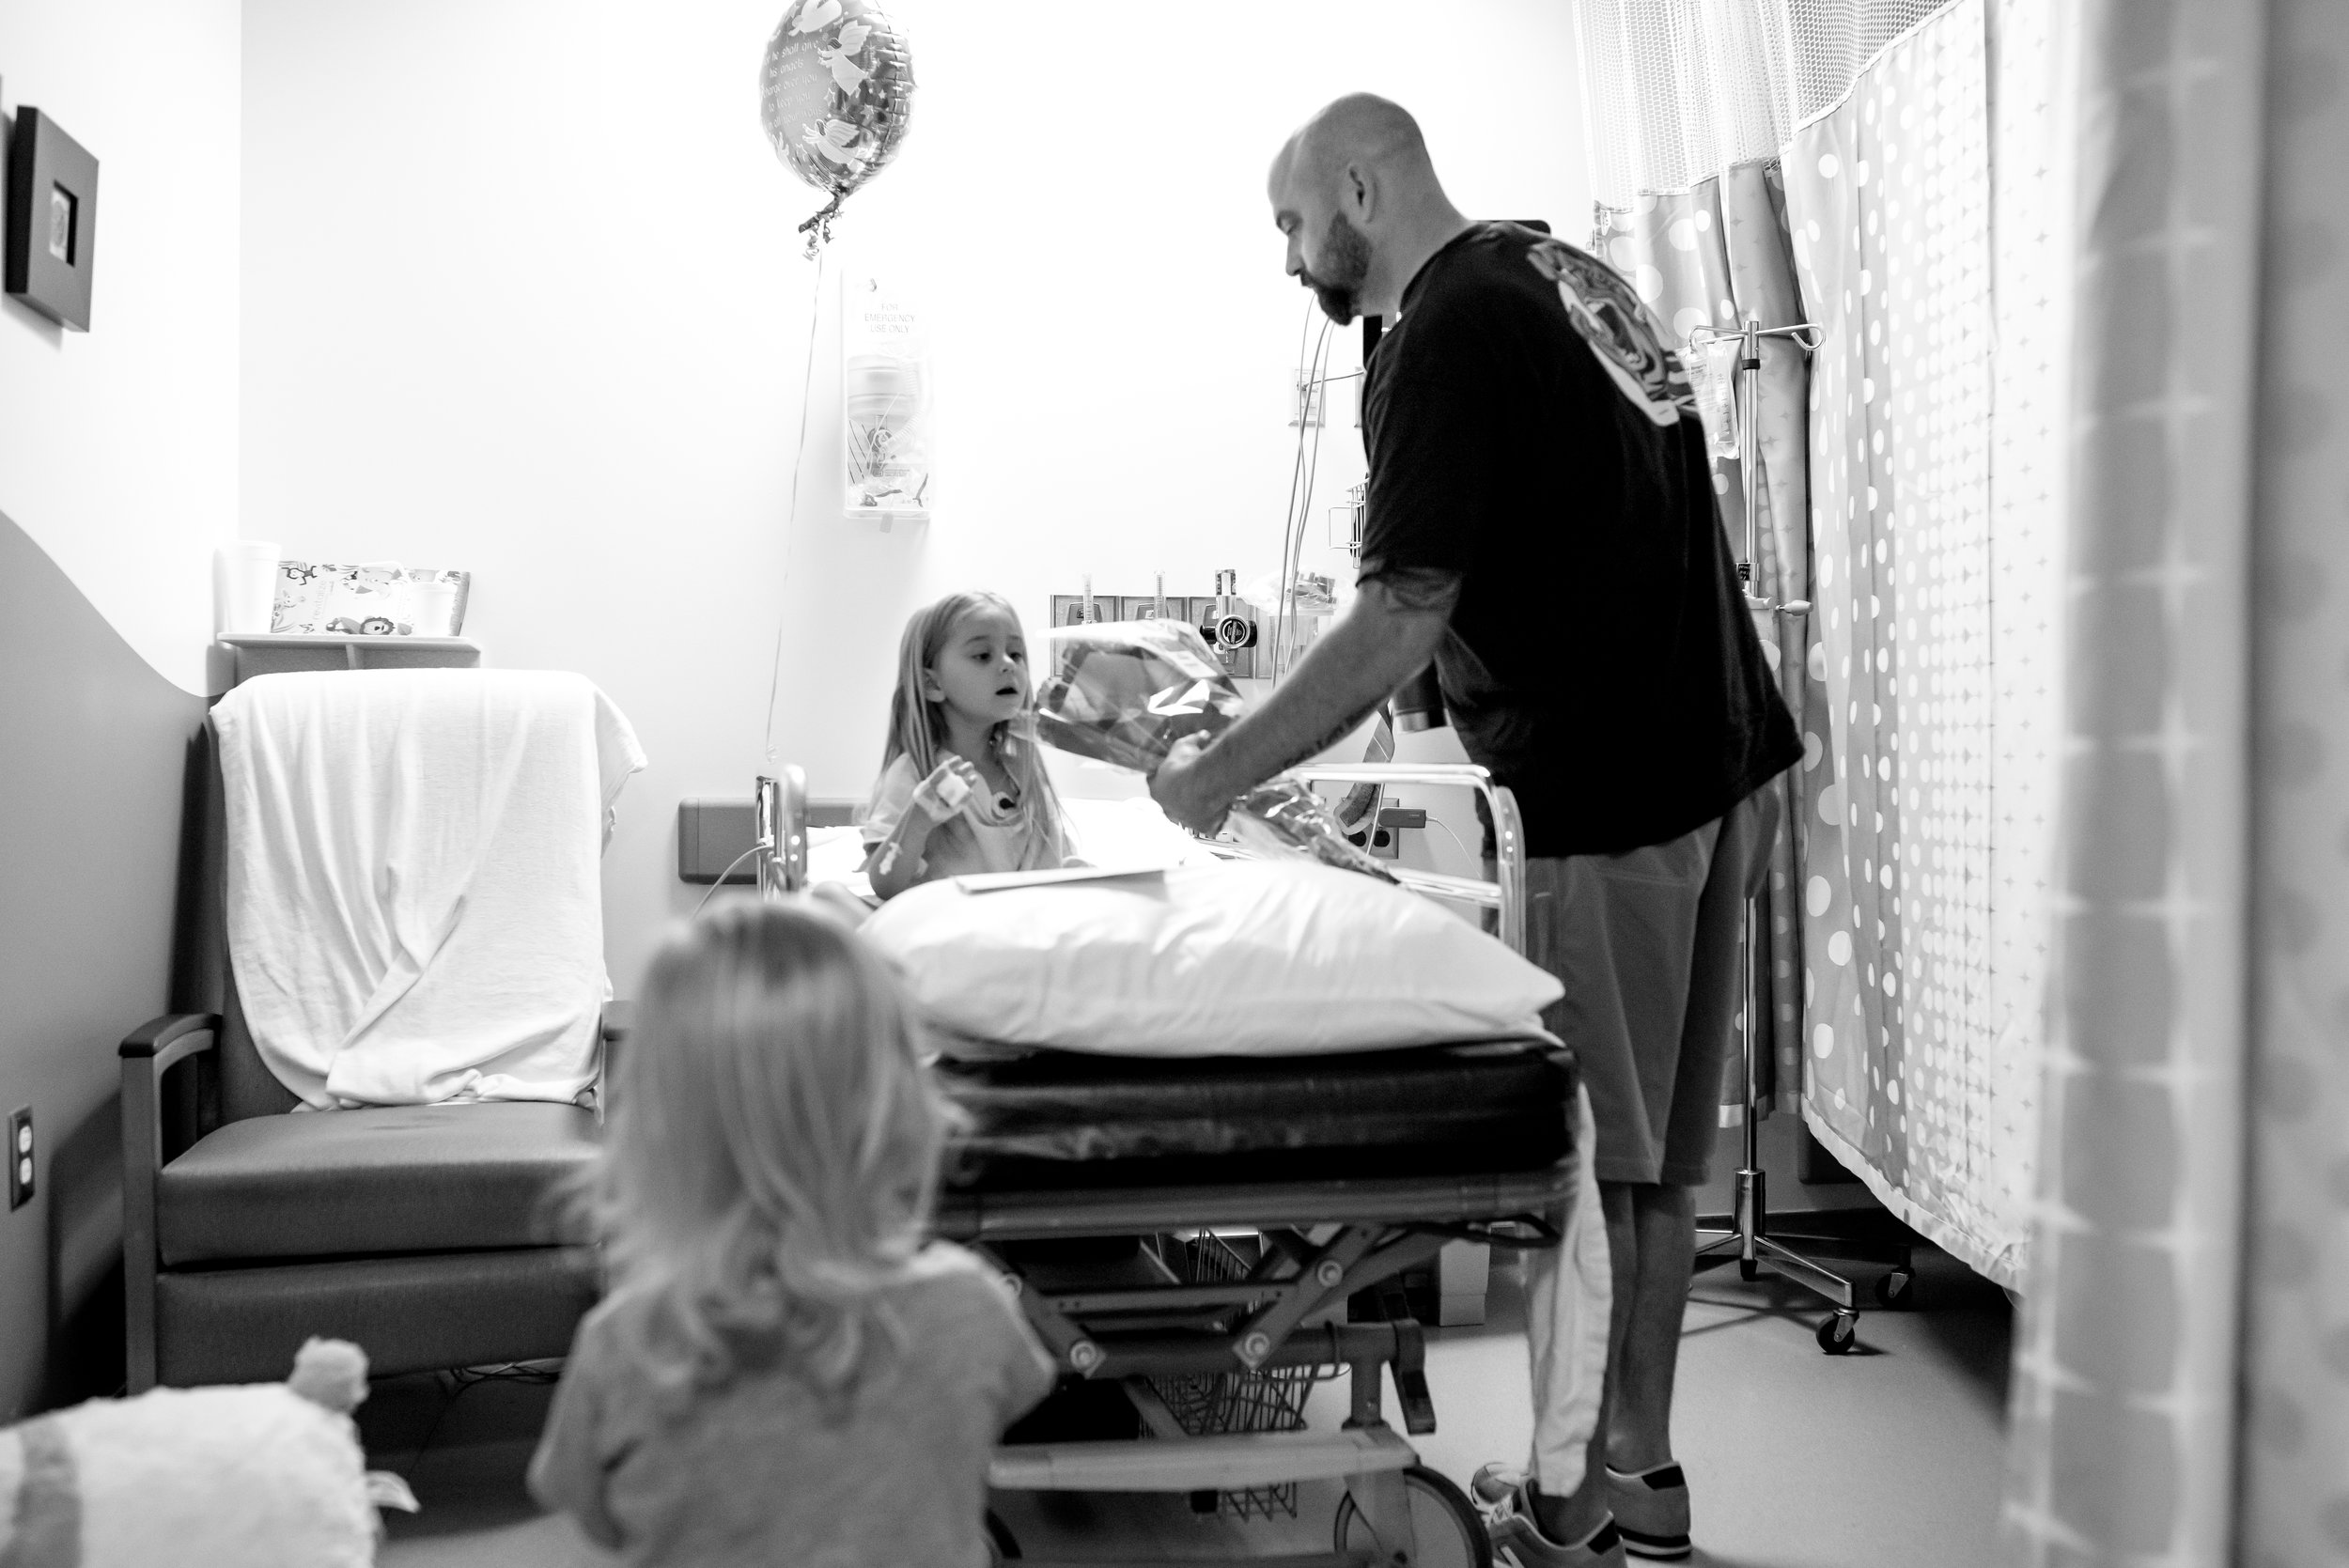 Dad presents flowers to daughter in hospital